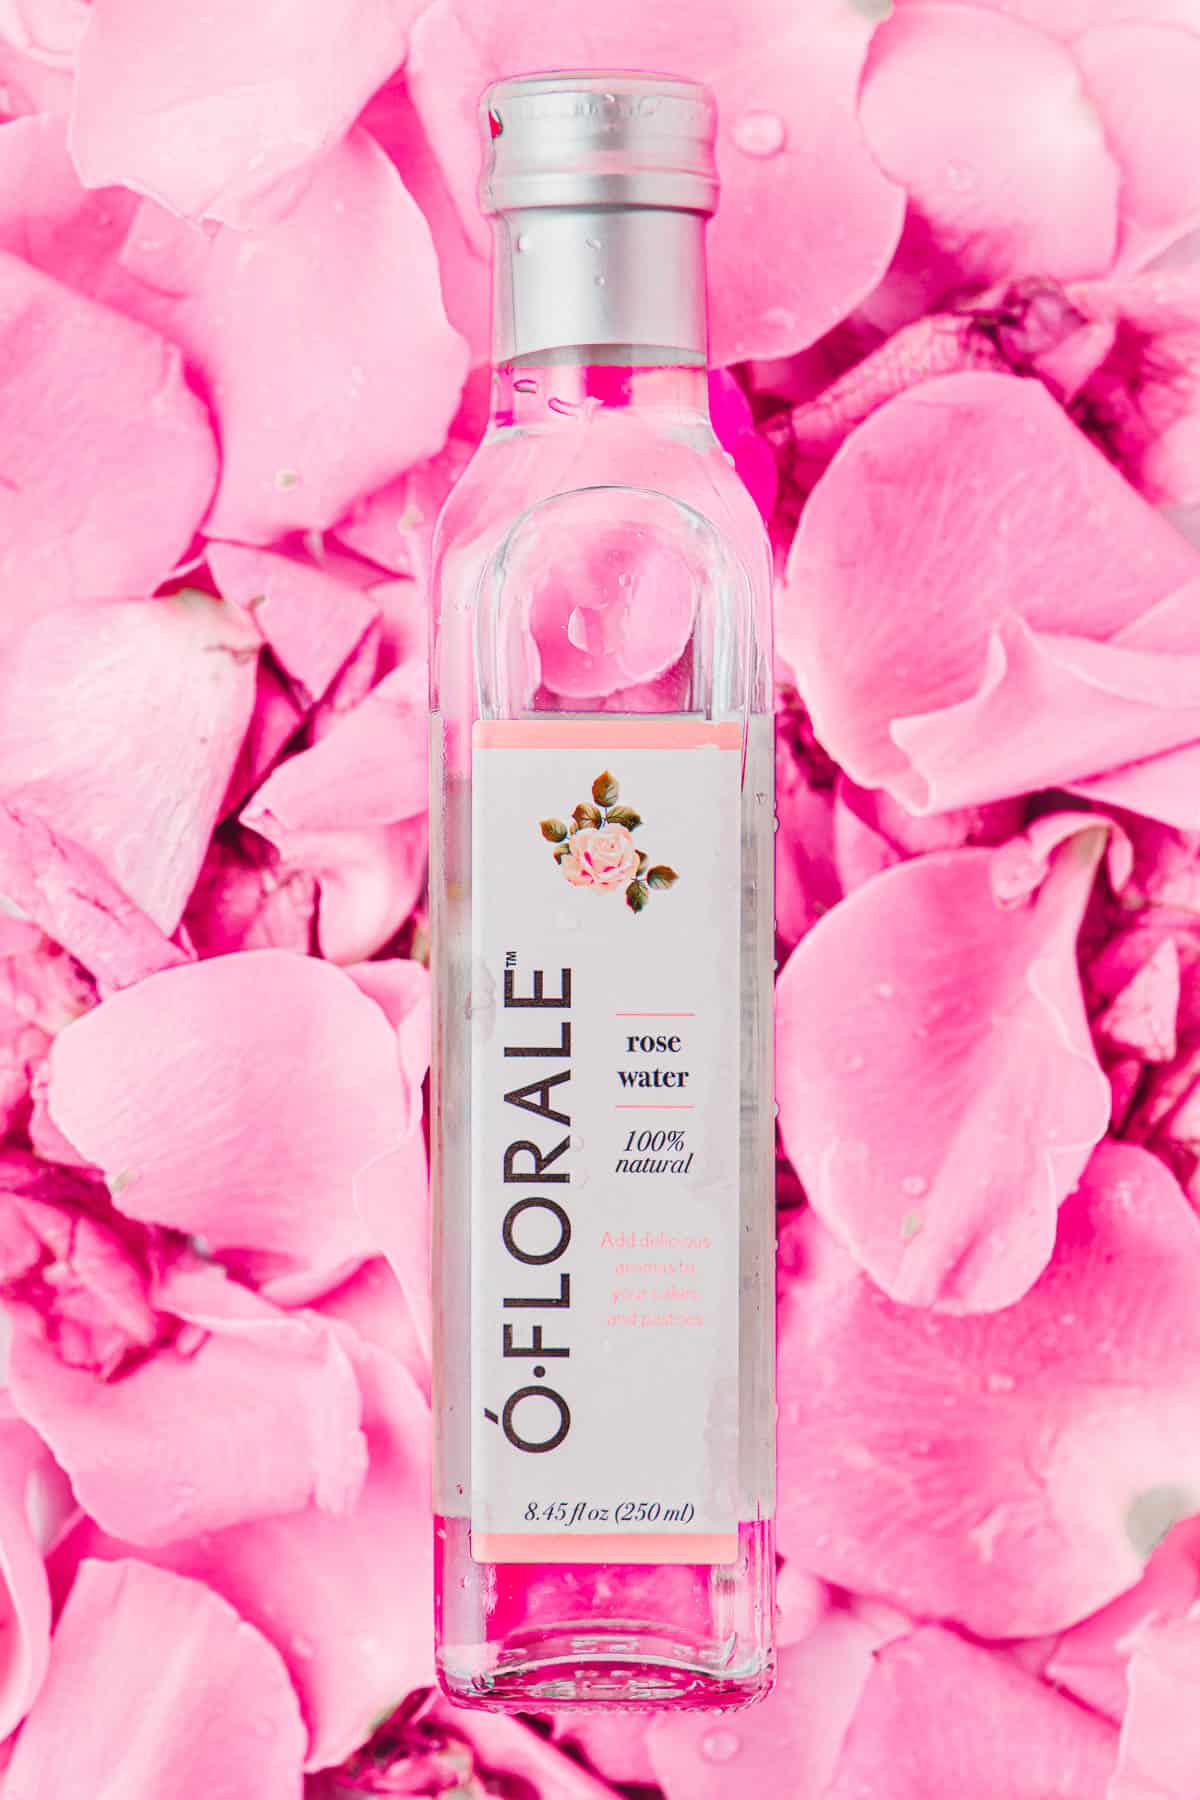 a bottle of o'florale rose water on a bed of pink rose petals.